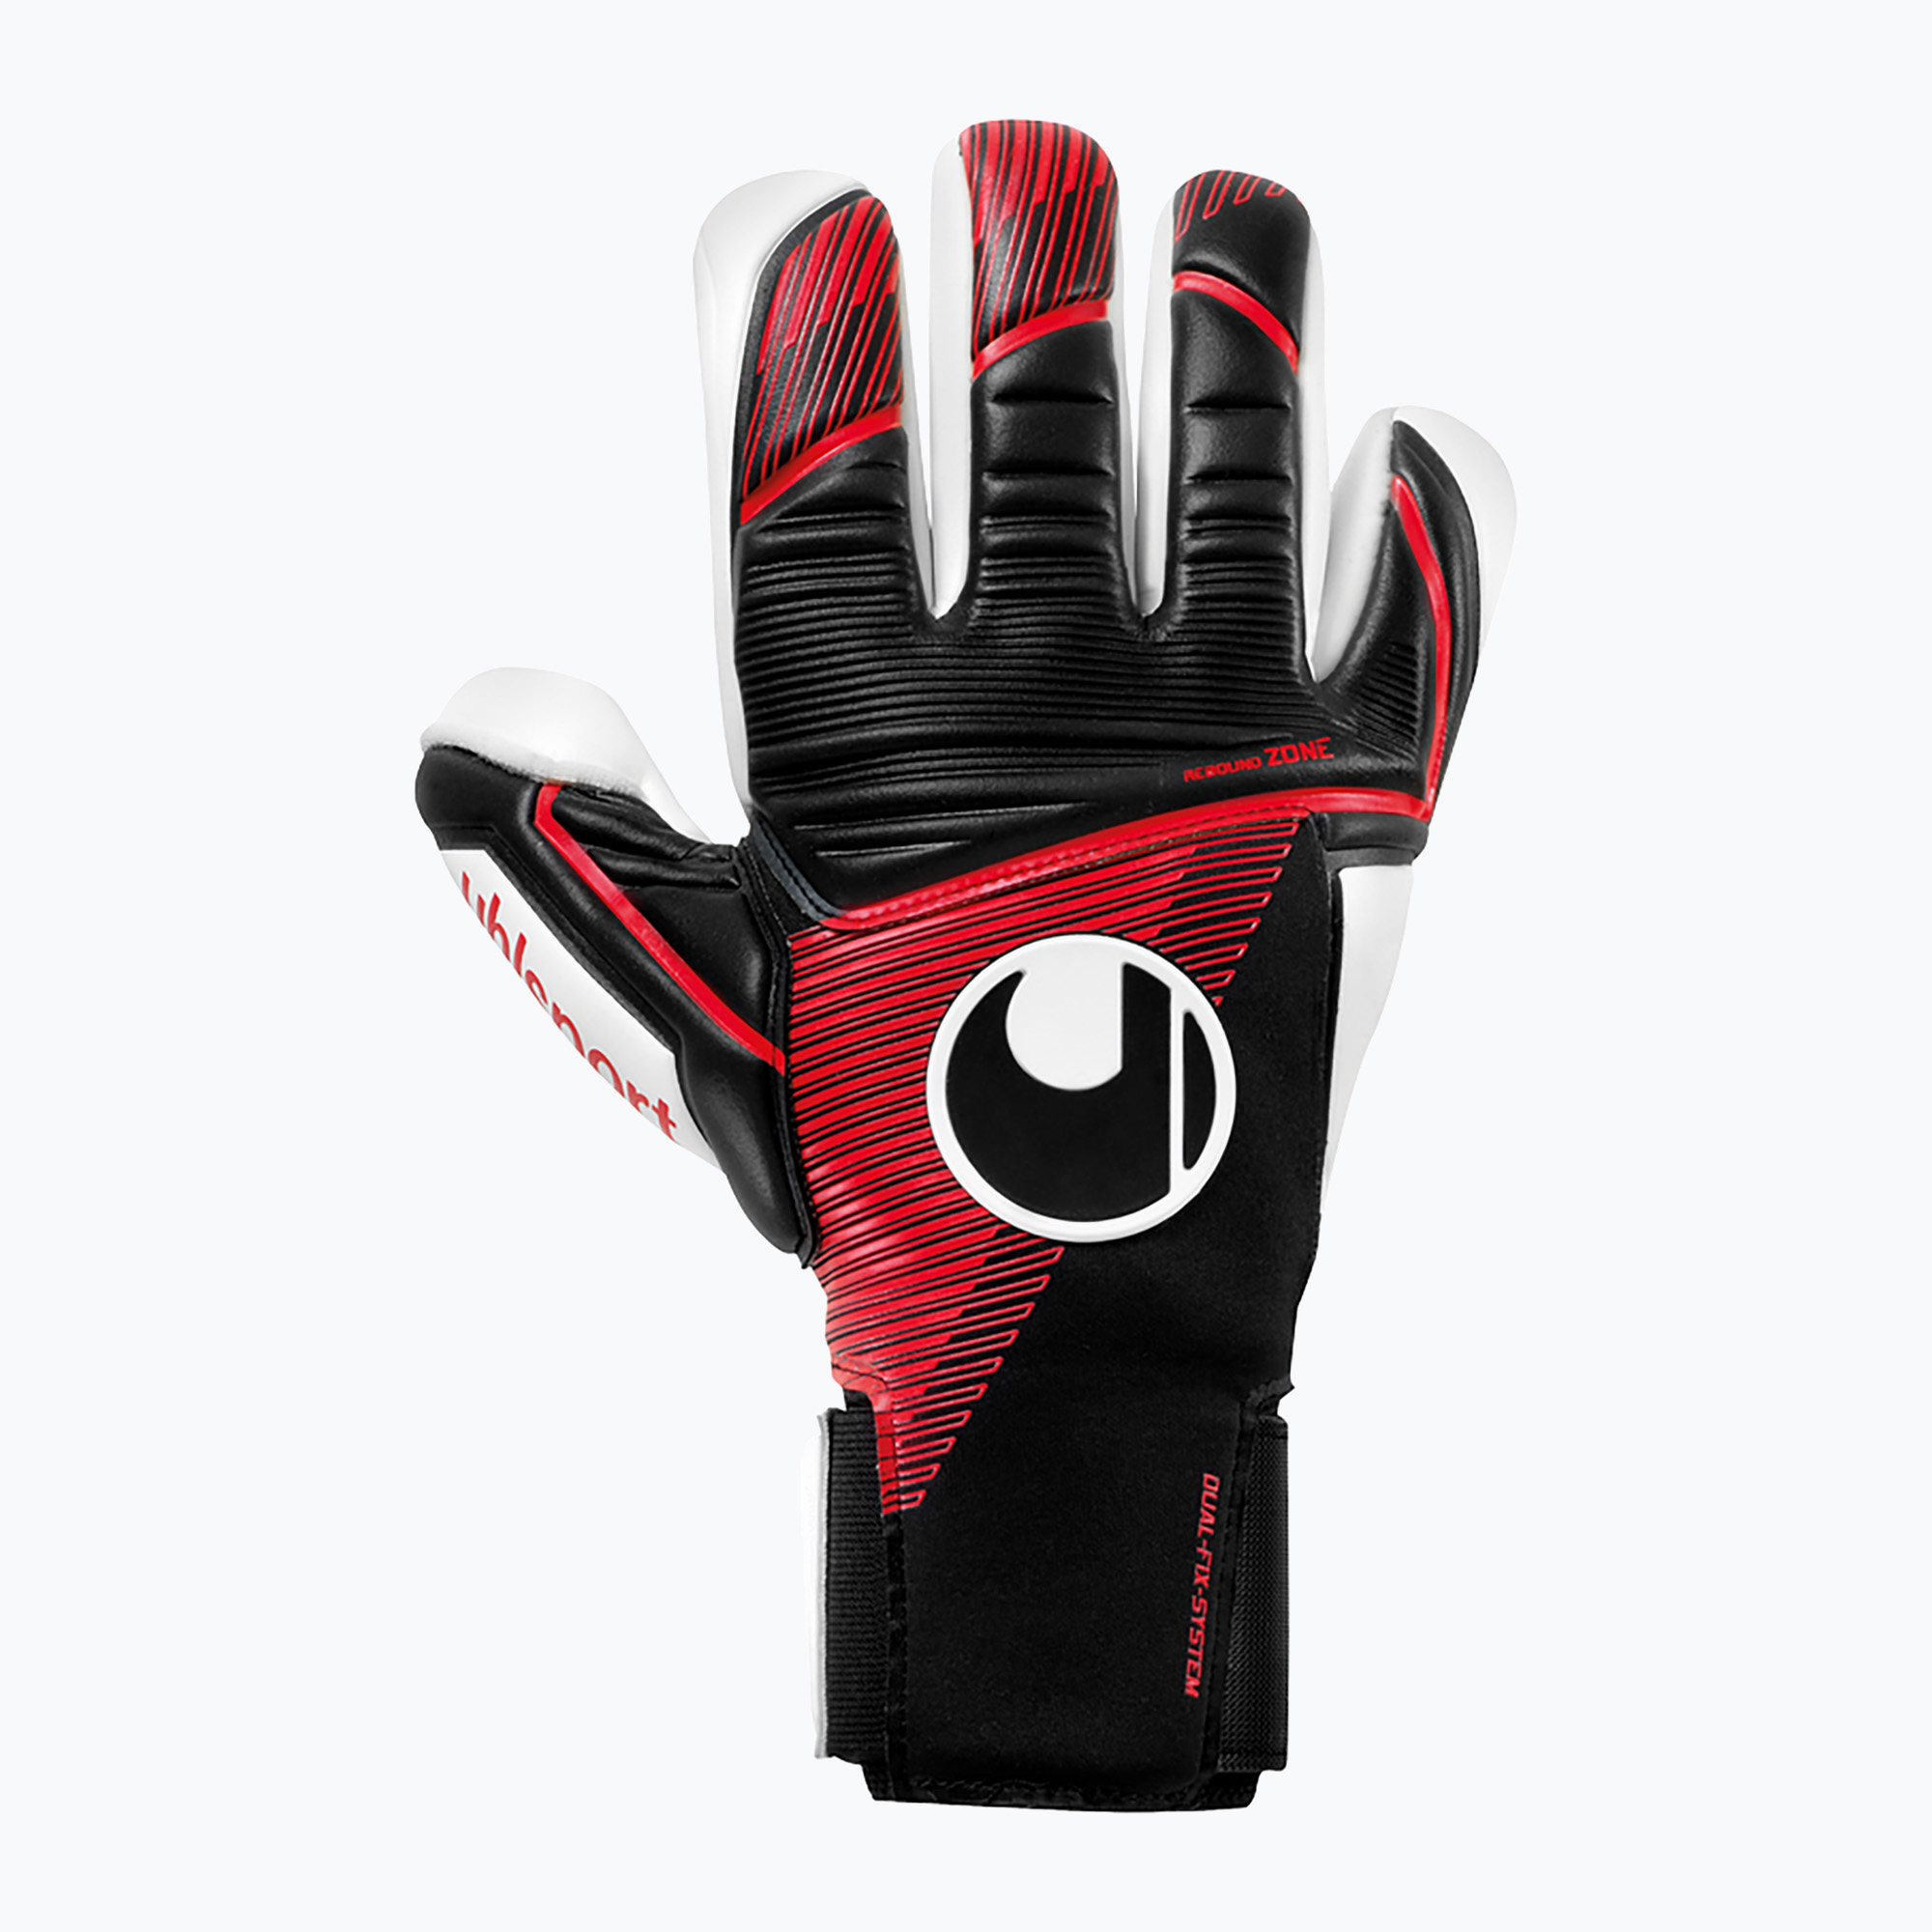 Детски вратарски ръкавици uhlsport Powerline Absolutgrip Finger Surround black/red/white